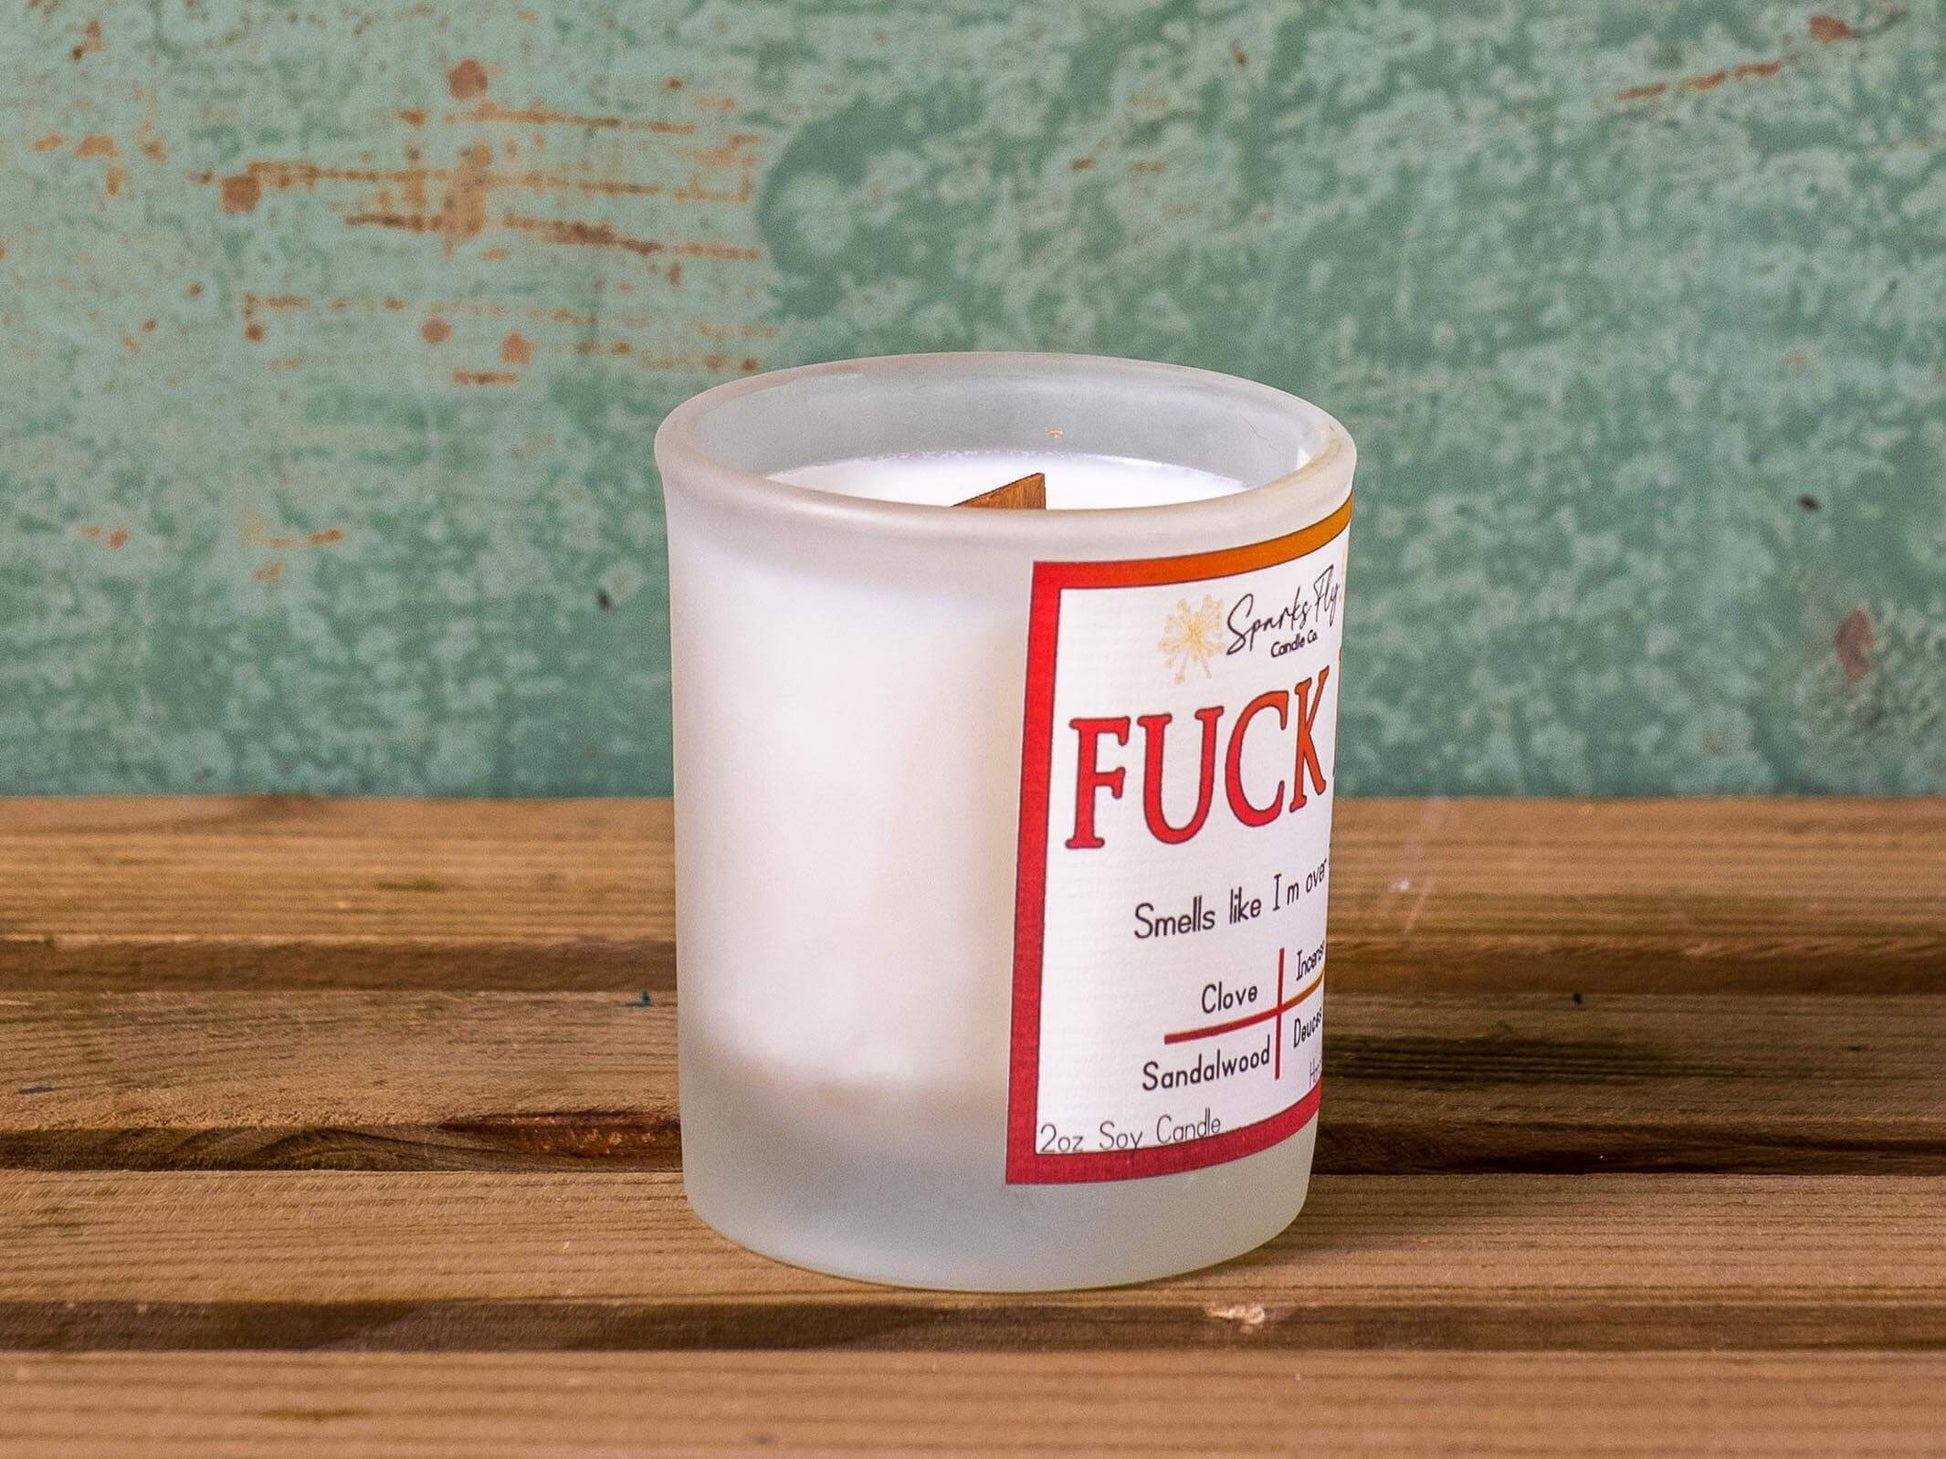 Fuck It Candle - Expressive aroma for those 'I'm done' moments.